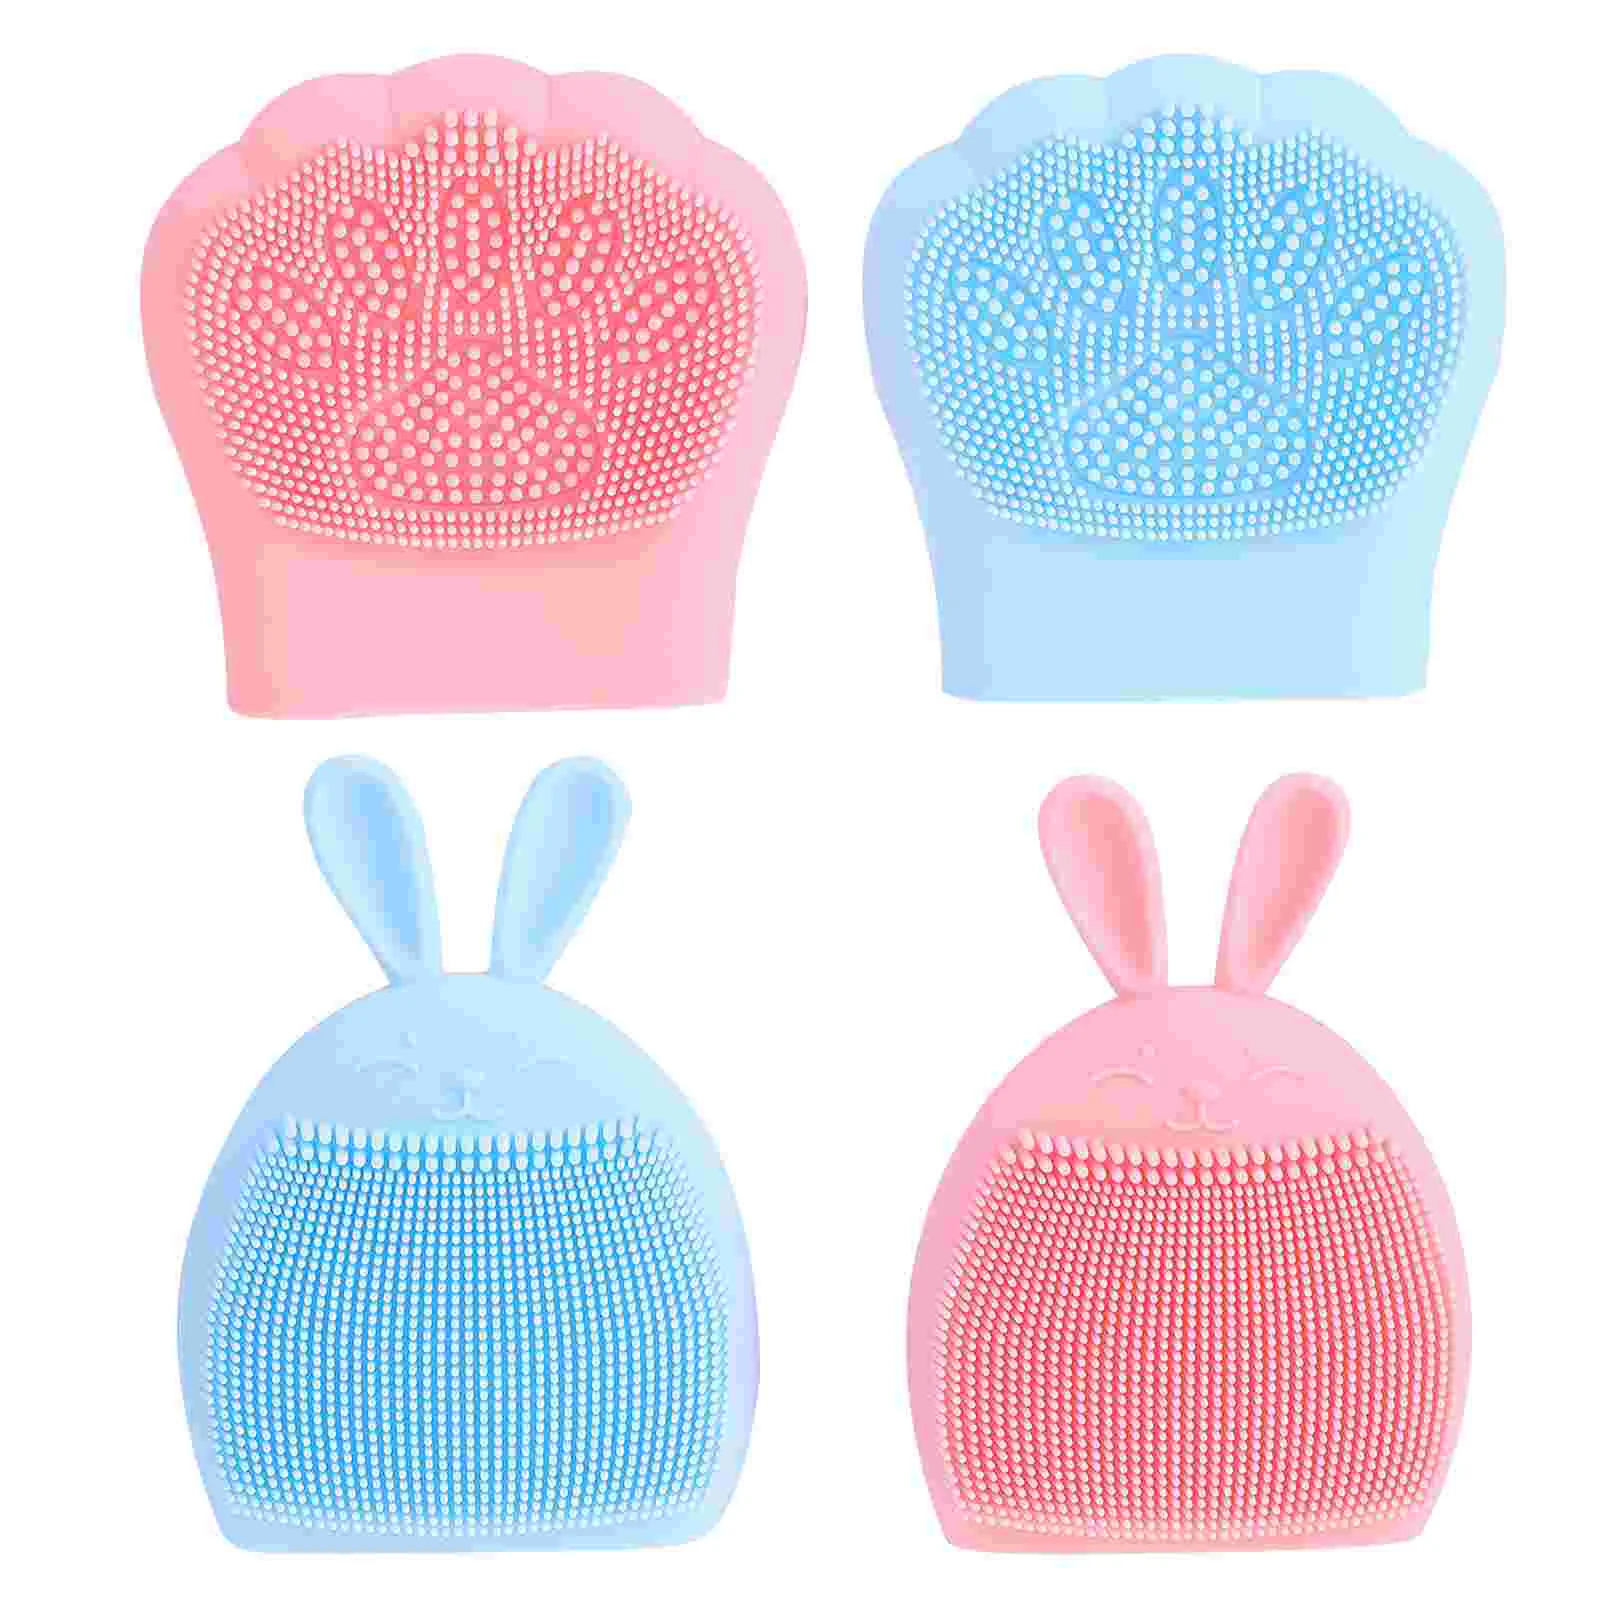 

Brush Face Facial Cleansing Silicone Wash Pore Cleanser Pad Scrubber Cleaning Nose Blackhead Exfoliating Scrub Exfoliator Manual